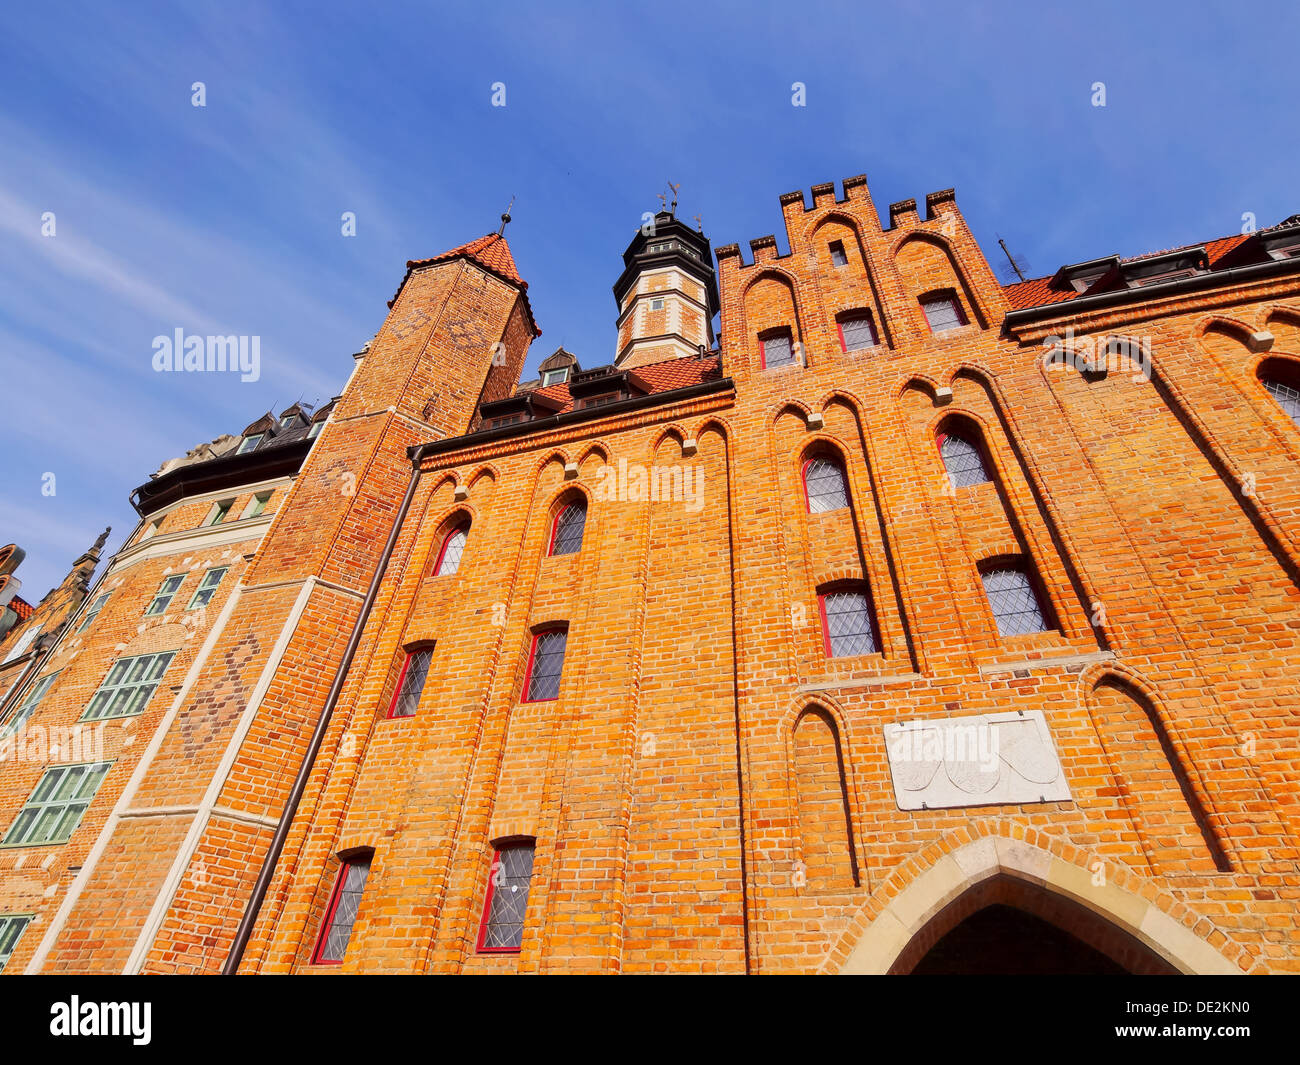 One of the old towns Gate in Gdansk, Poland Stock Photo